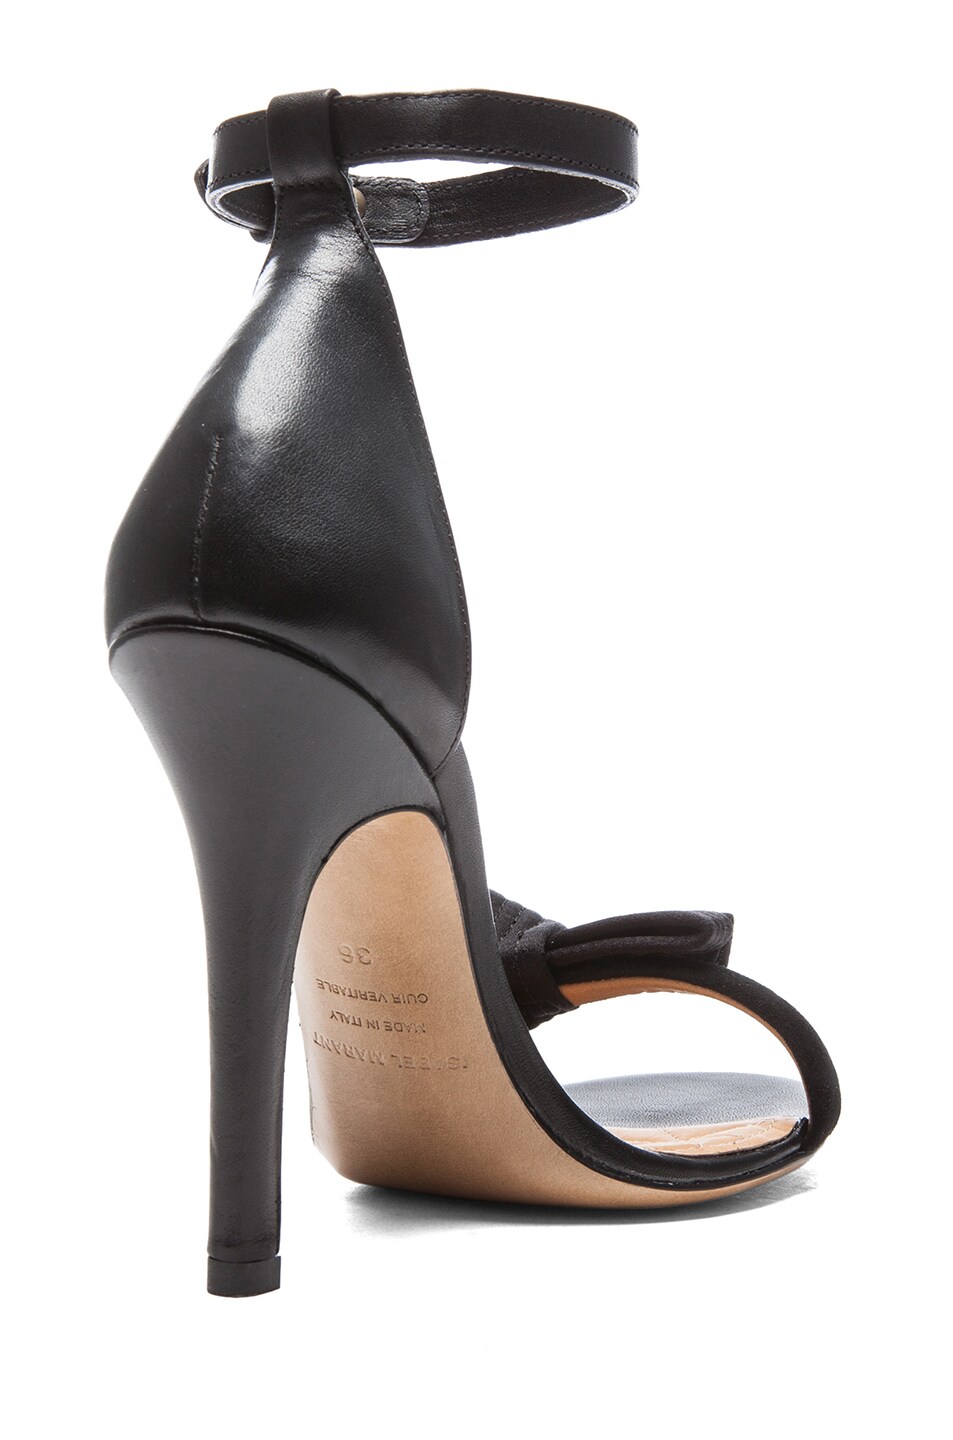 Isabel Marant Play Calfskin Leather Pumps in Black | FWRD